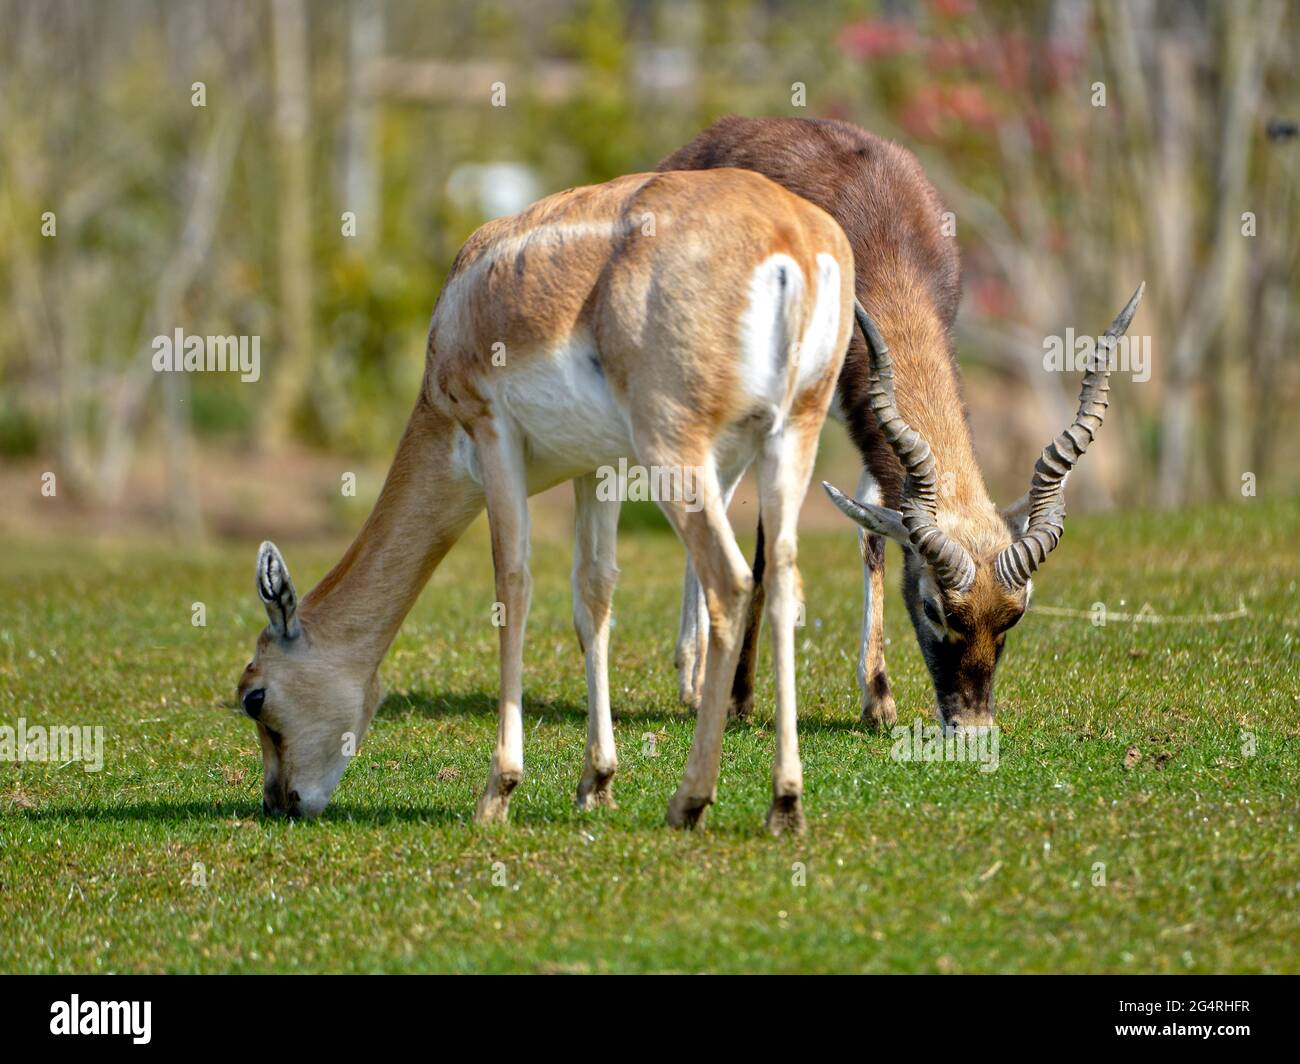 Male and female blackbucks (Antilope cervicapra) also known as the Indian antelope, is an antelope native to India and Nepal Stock Photo